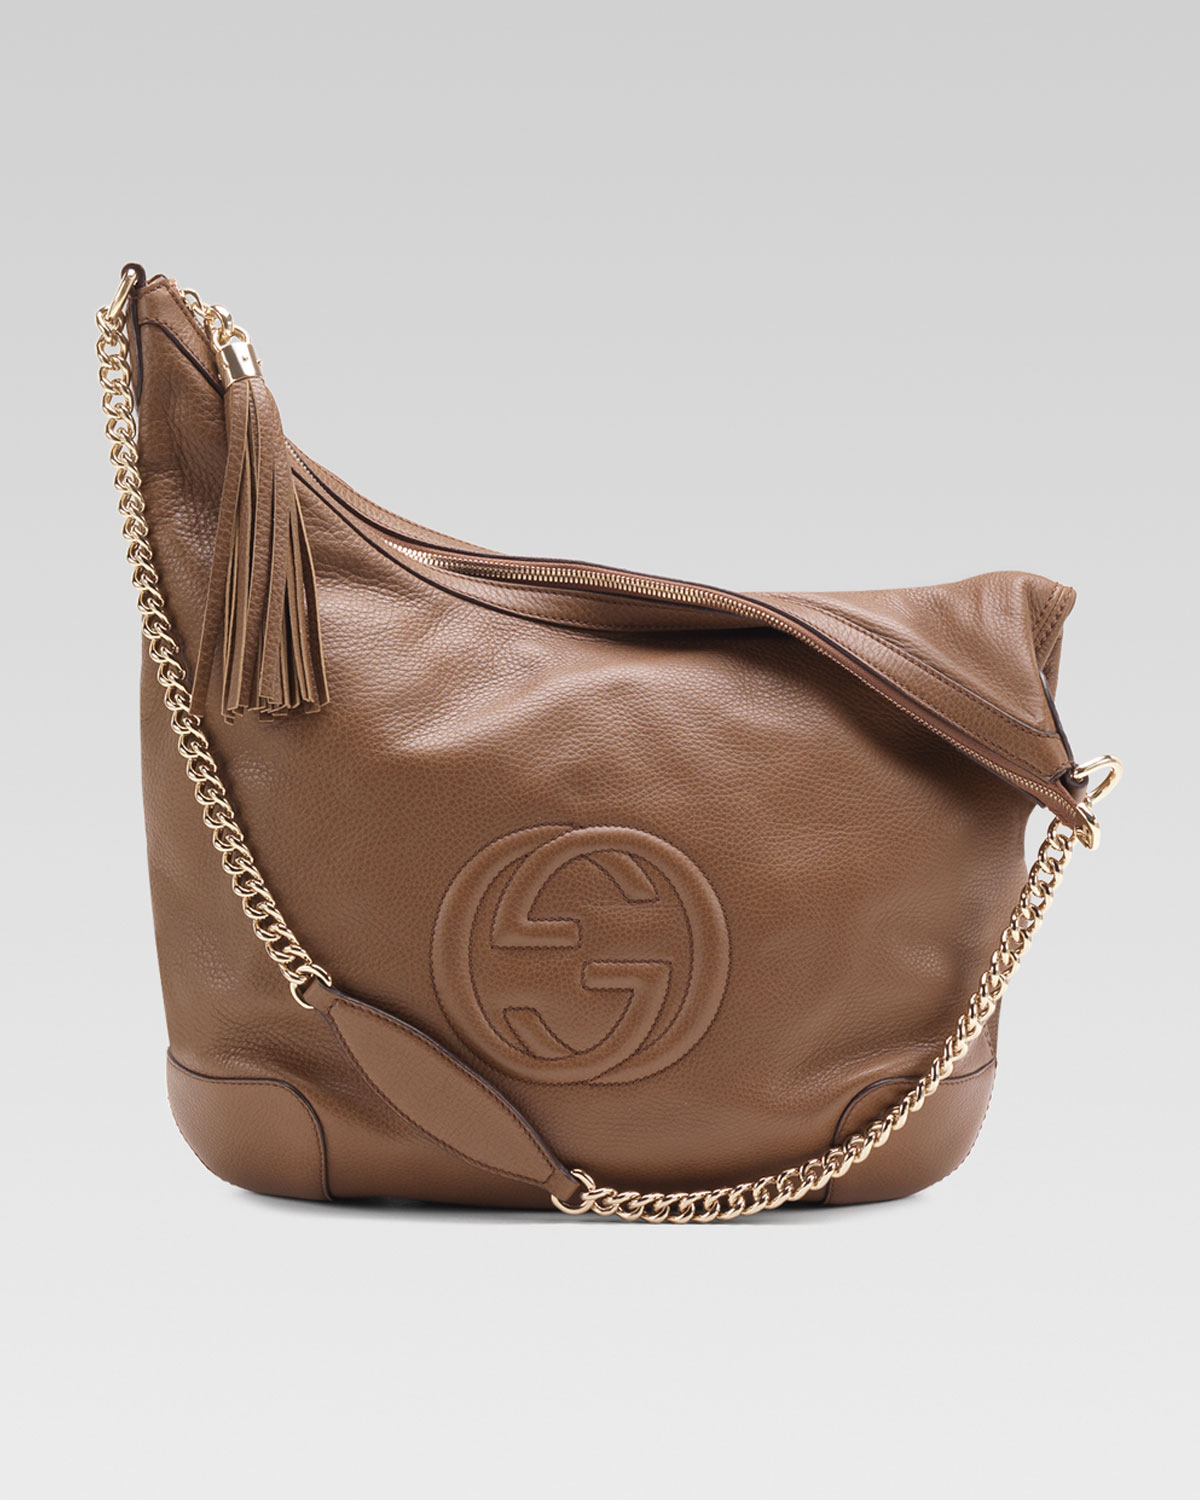 Lyst - Gucci Soho Maple Brown Leather Shoulder Bag with Chain Strap in Brown